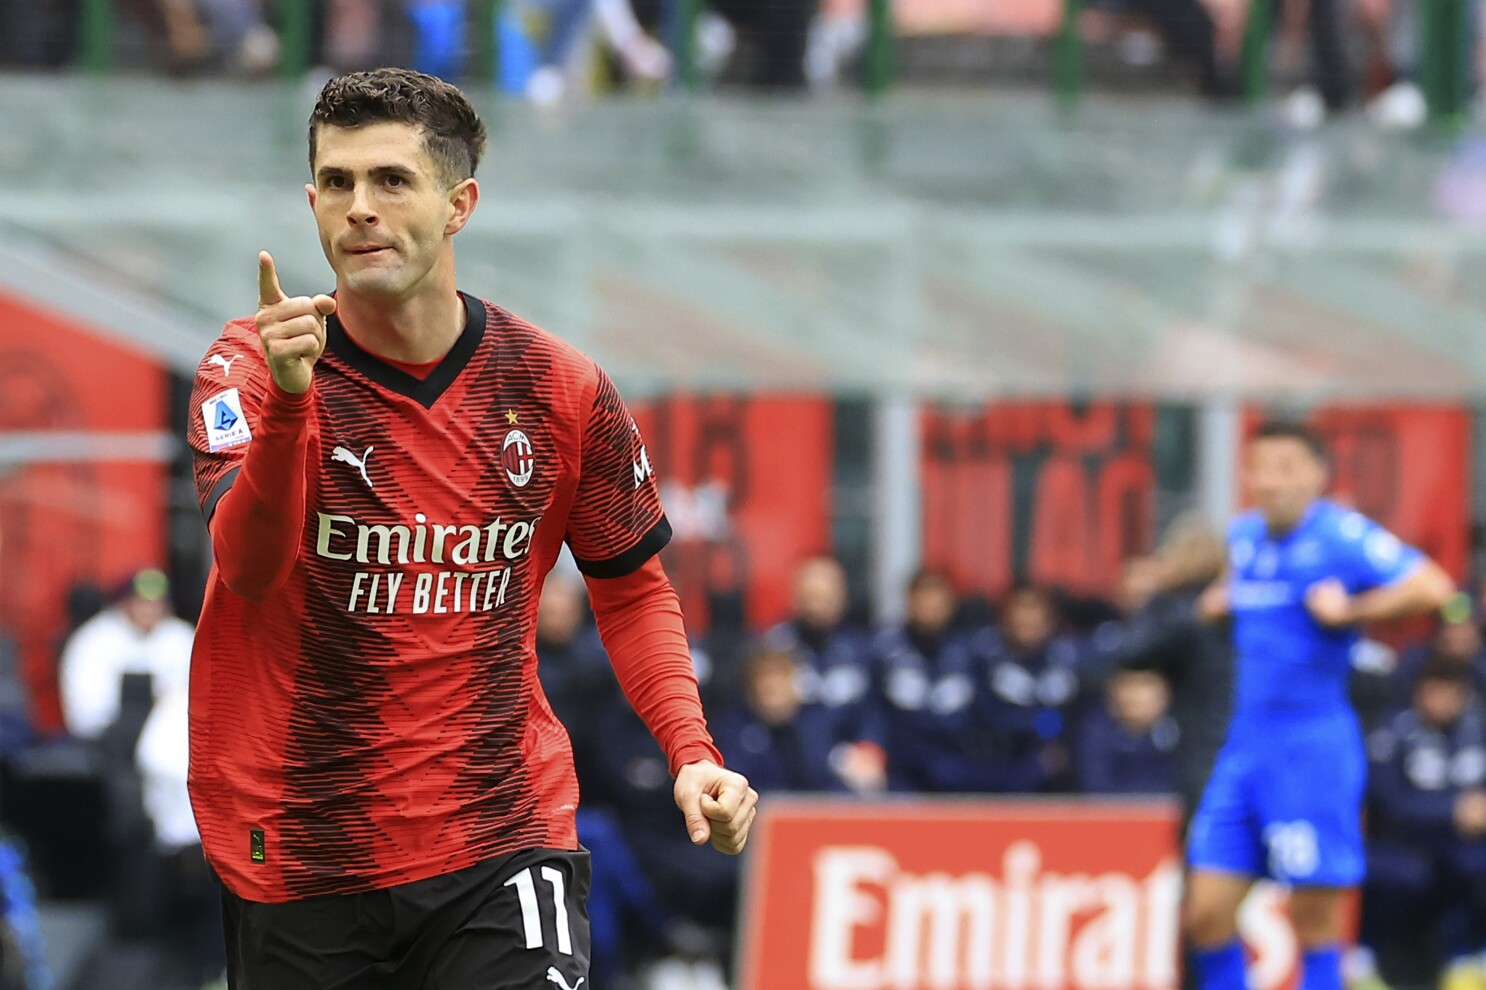 Christian Pulisic is putting together a career year at Milan following his transfer from Chelsea. The right winger position has been a sore spot.